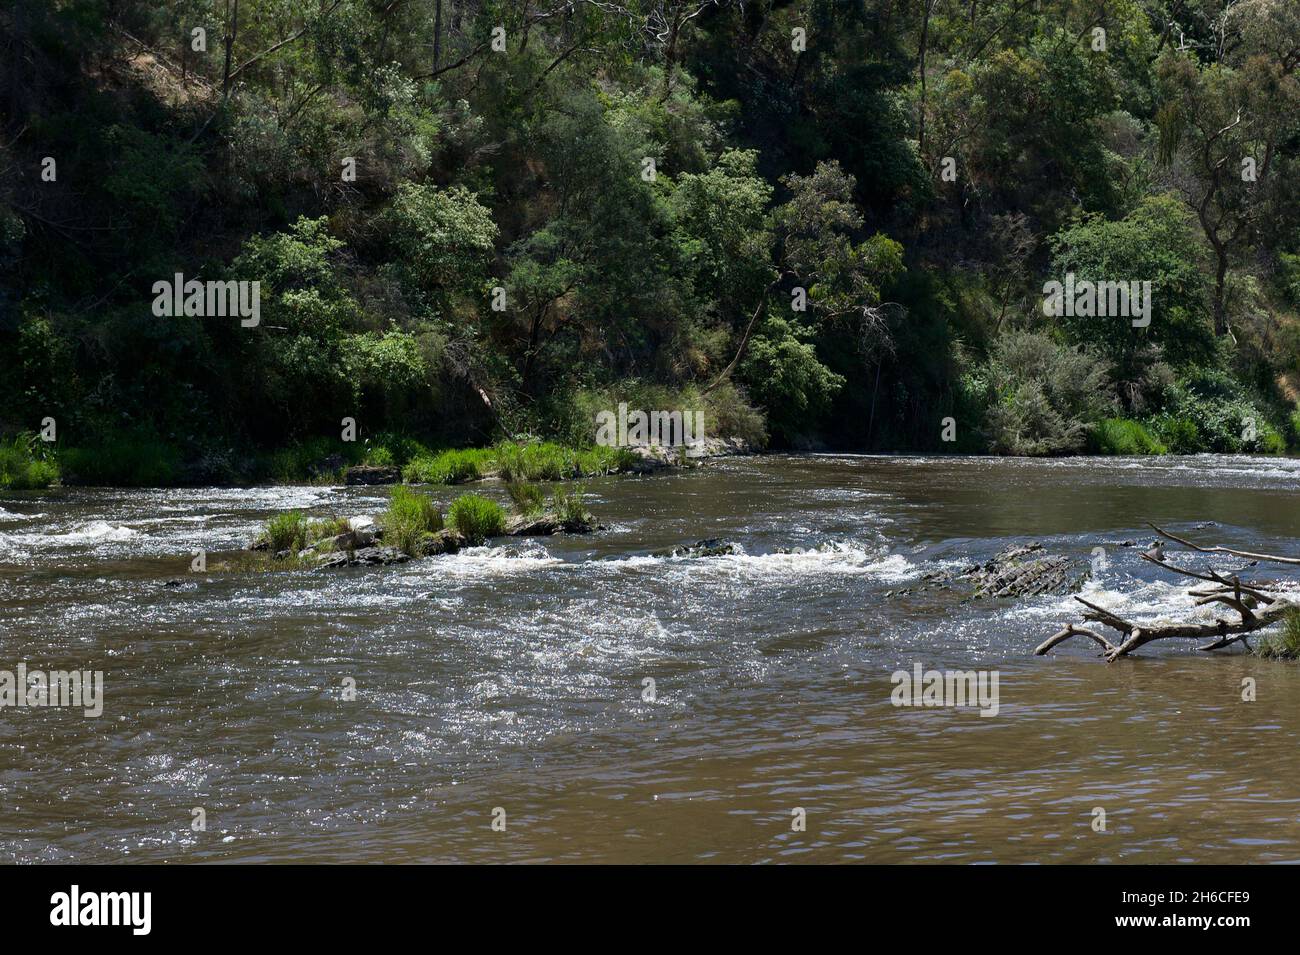 Ancient history - Aboriginal fish traps built with rocks in the Yarra River at Warrandyte in Victoria, Australia. Stock Photo